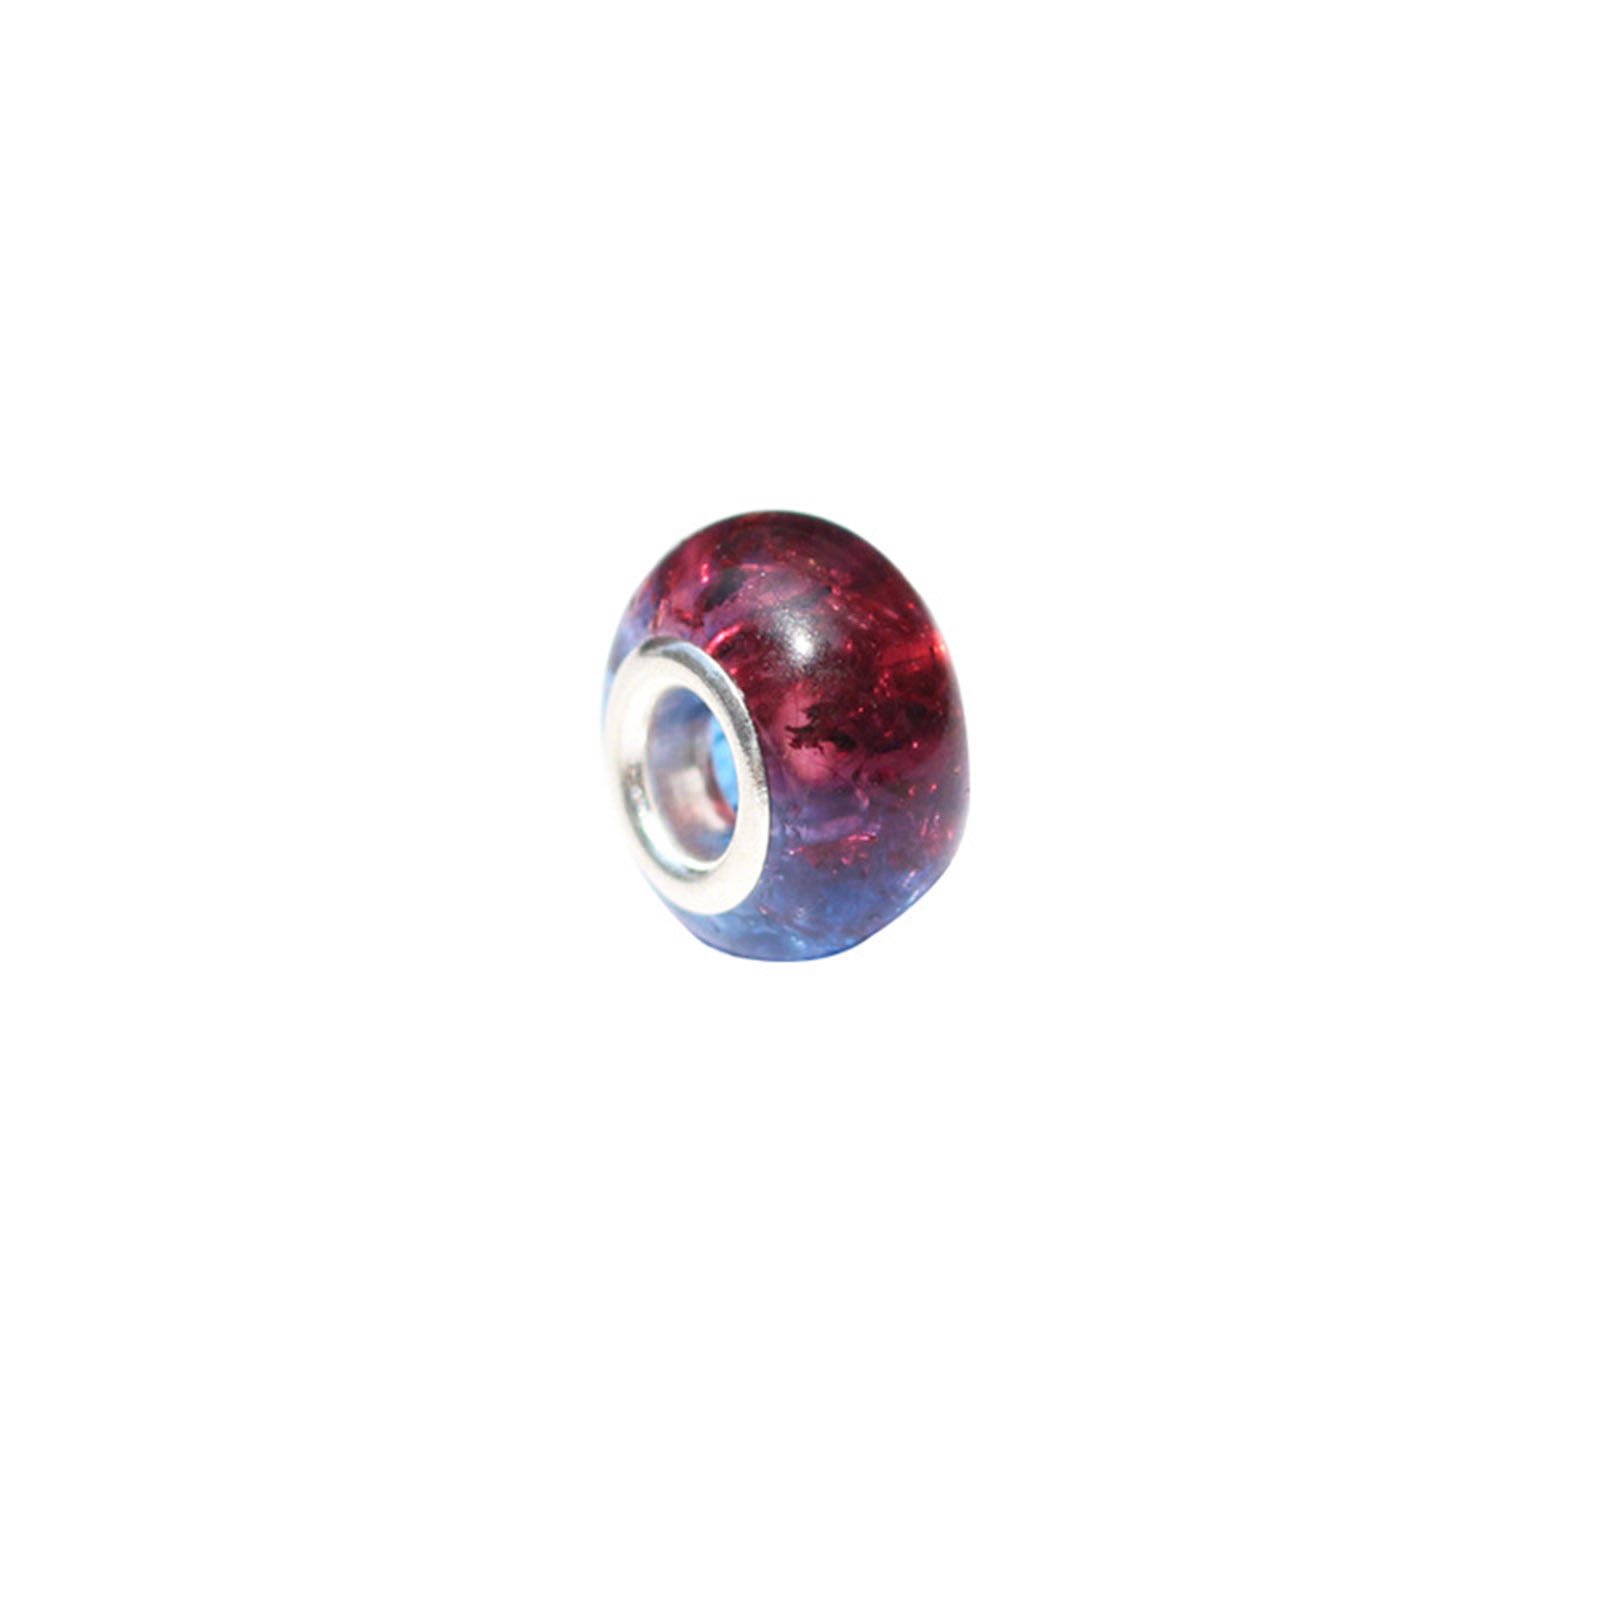 Picture of Resin European Style Large Hole Charm Beads Red & Blue Round Crack Gradient Color 14mm Dia., Hole: Approx 5mm, 20 PCs